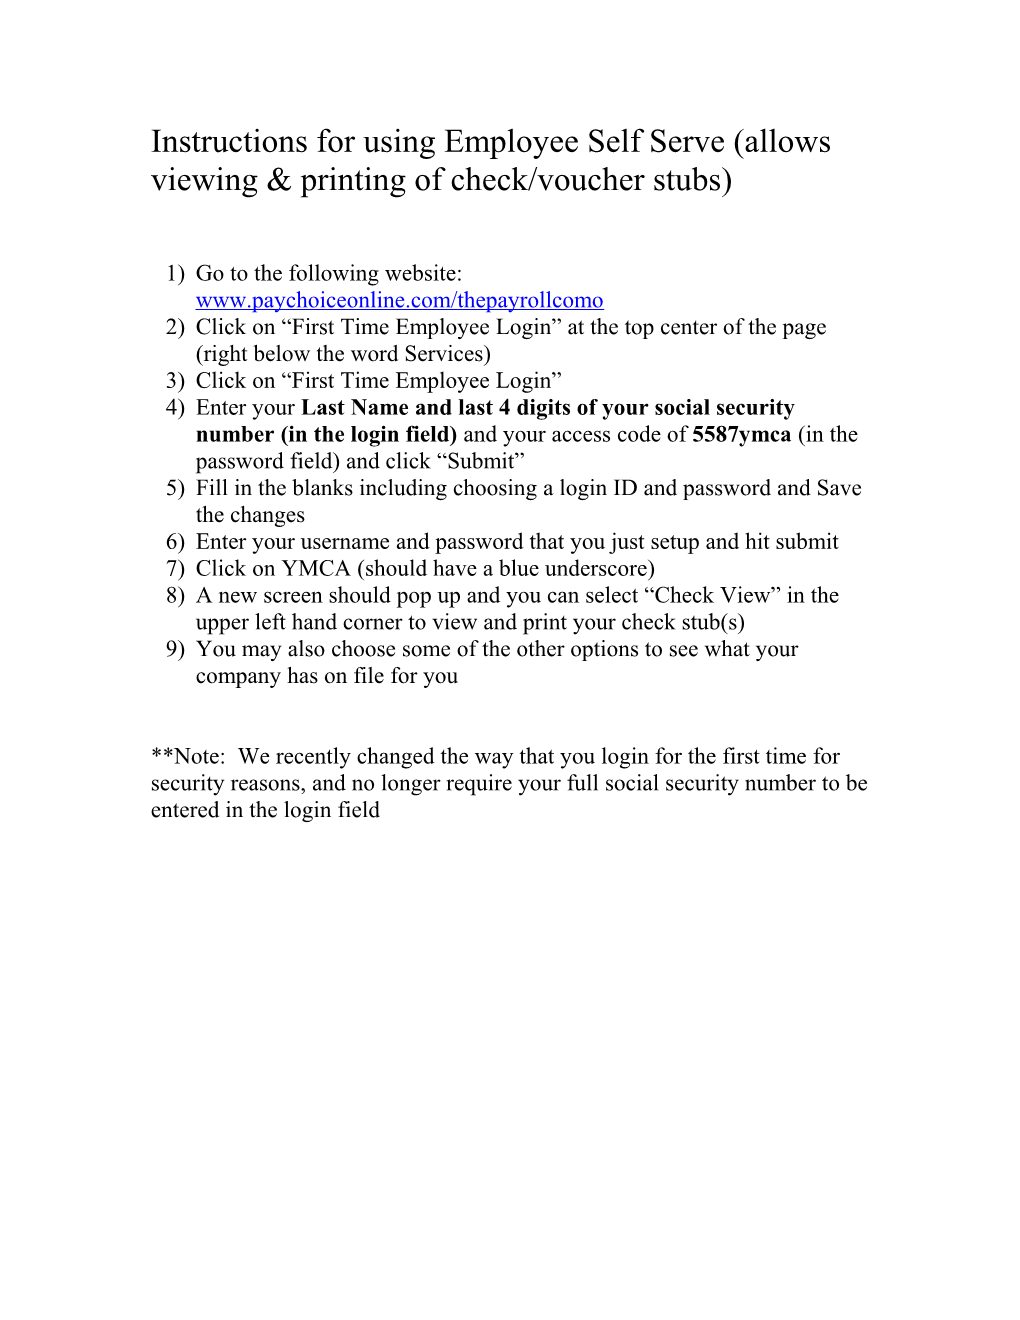 Instructions for Using Employee Self Serve (Allows Viewing & Printing of Check/Voucher Stubs)